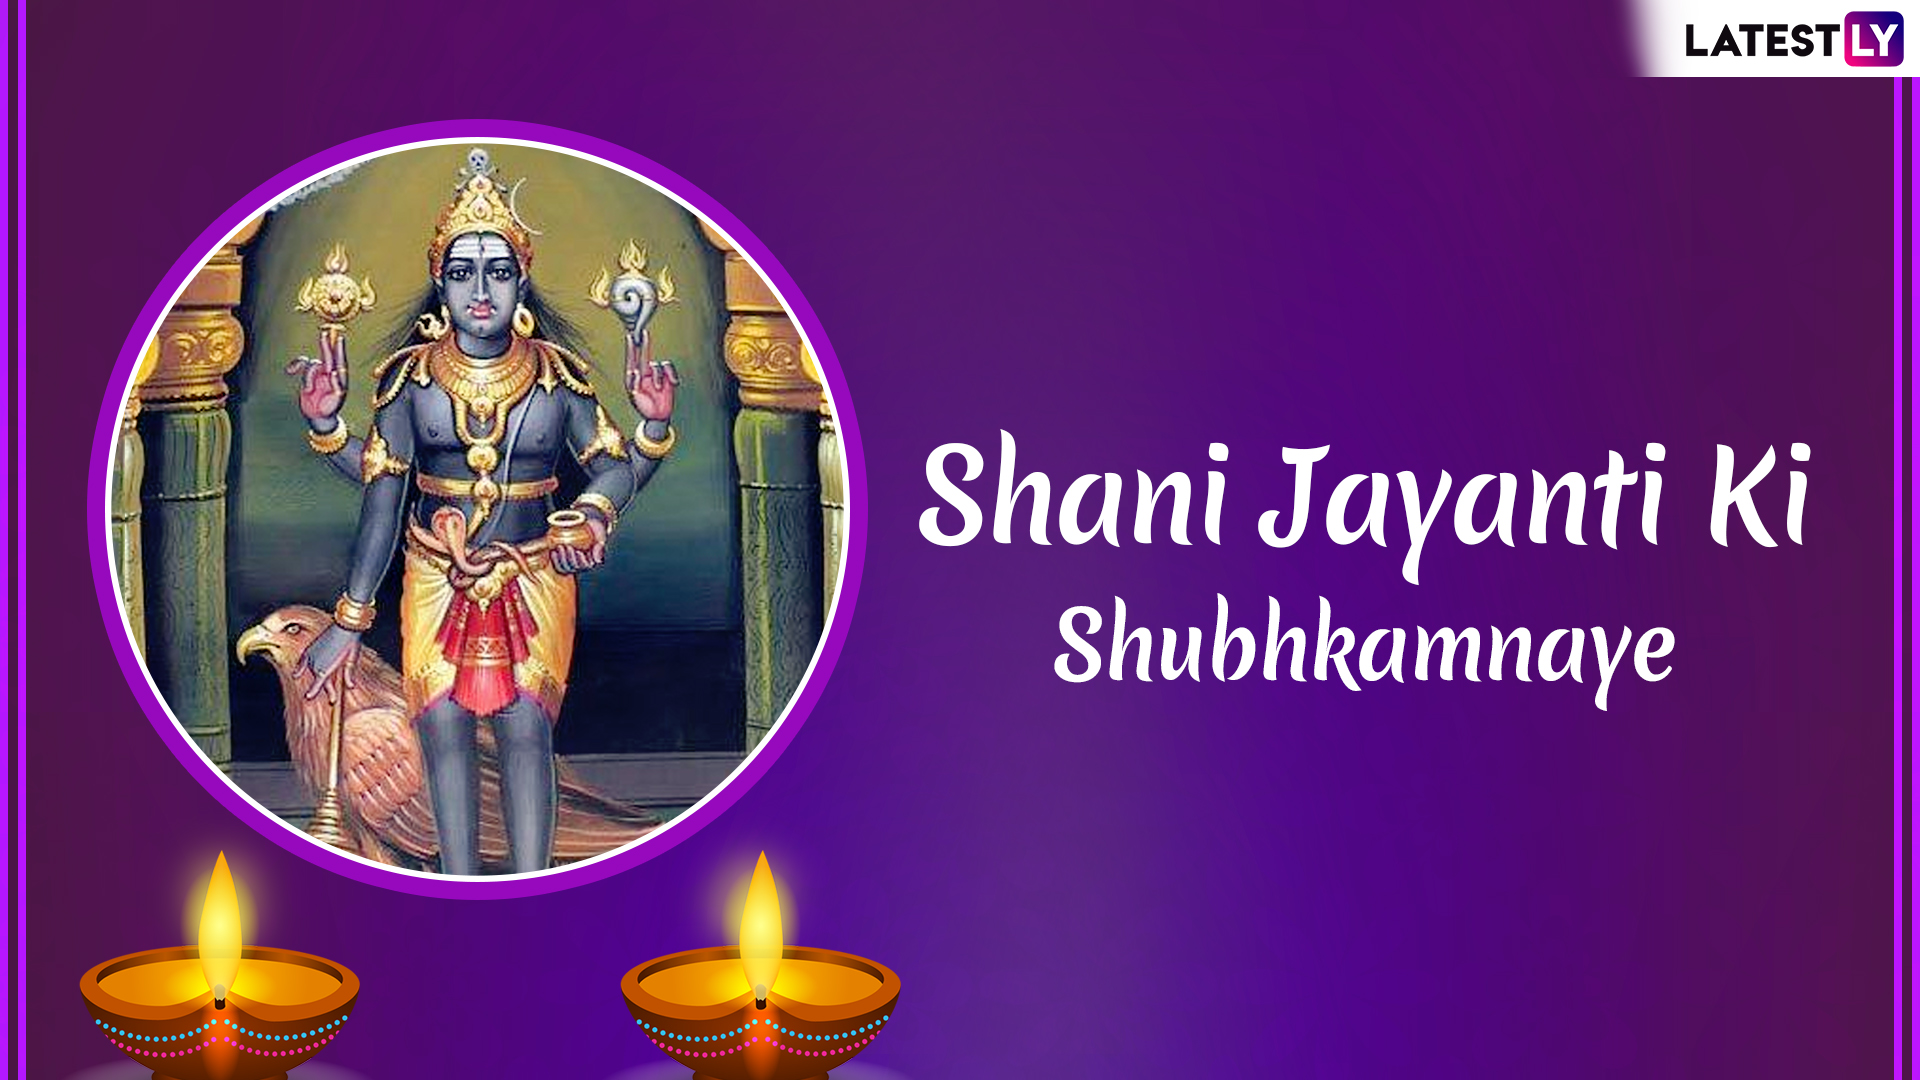 Shani Jayanti Images & HD Wallpapers for Free Download Online: Wish Happy  Shani Jayanti 2019 With GIF Greetings & WhatsApp Sticker Messages | 🙏🏻  LatestLY